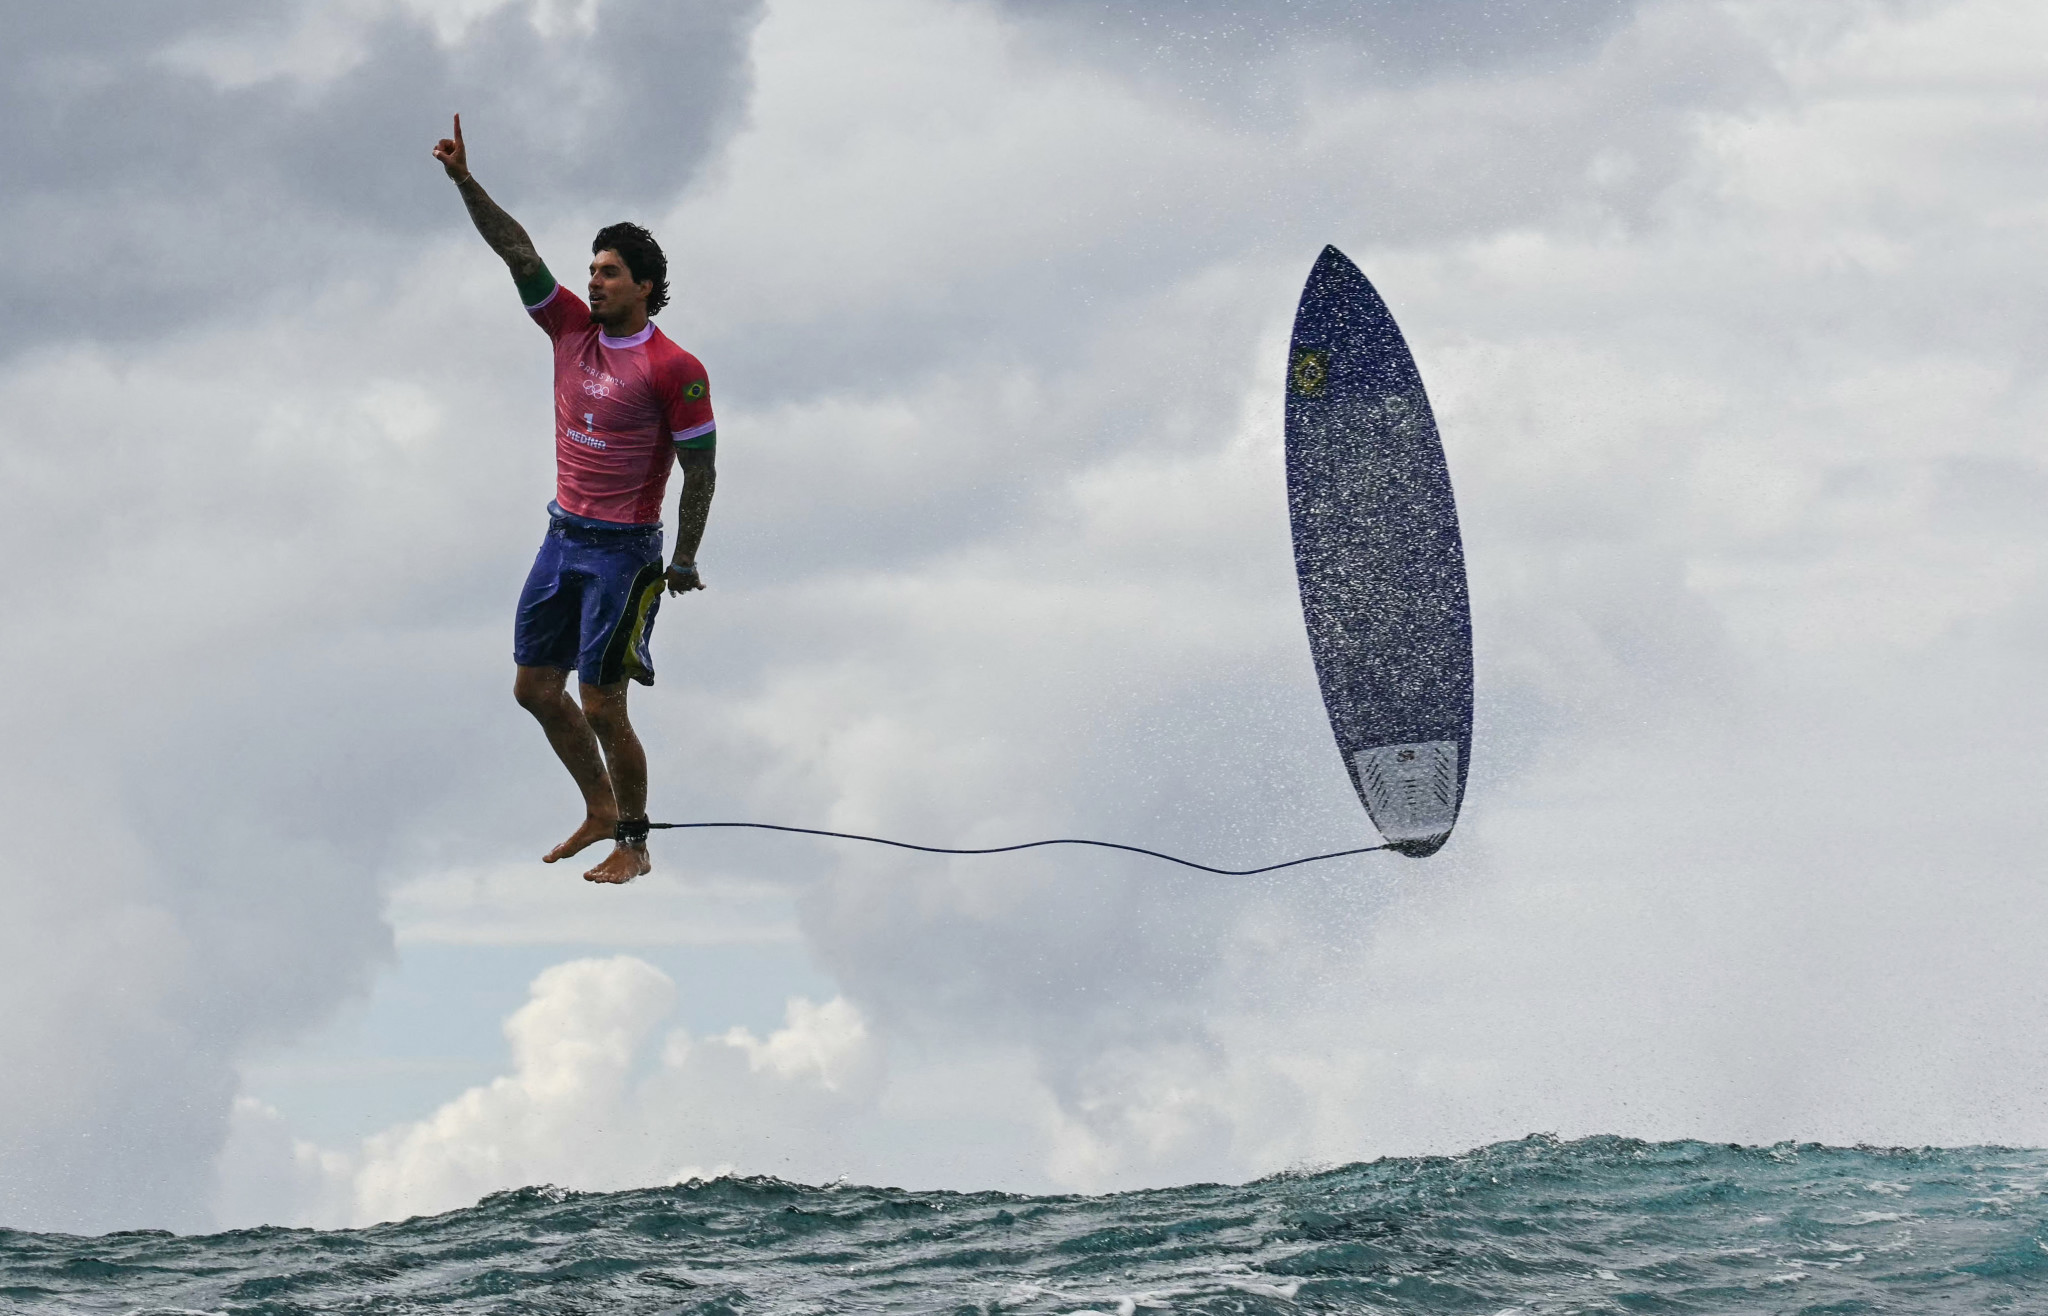 Gabriel Medina's shot is another savouring moment. GETTY IMAGES